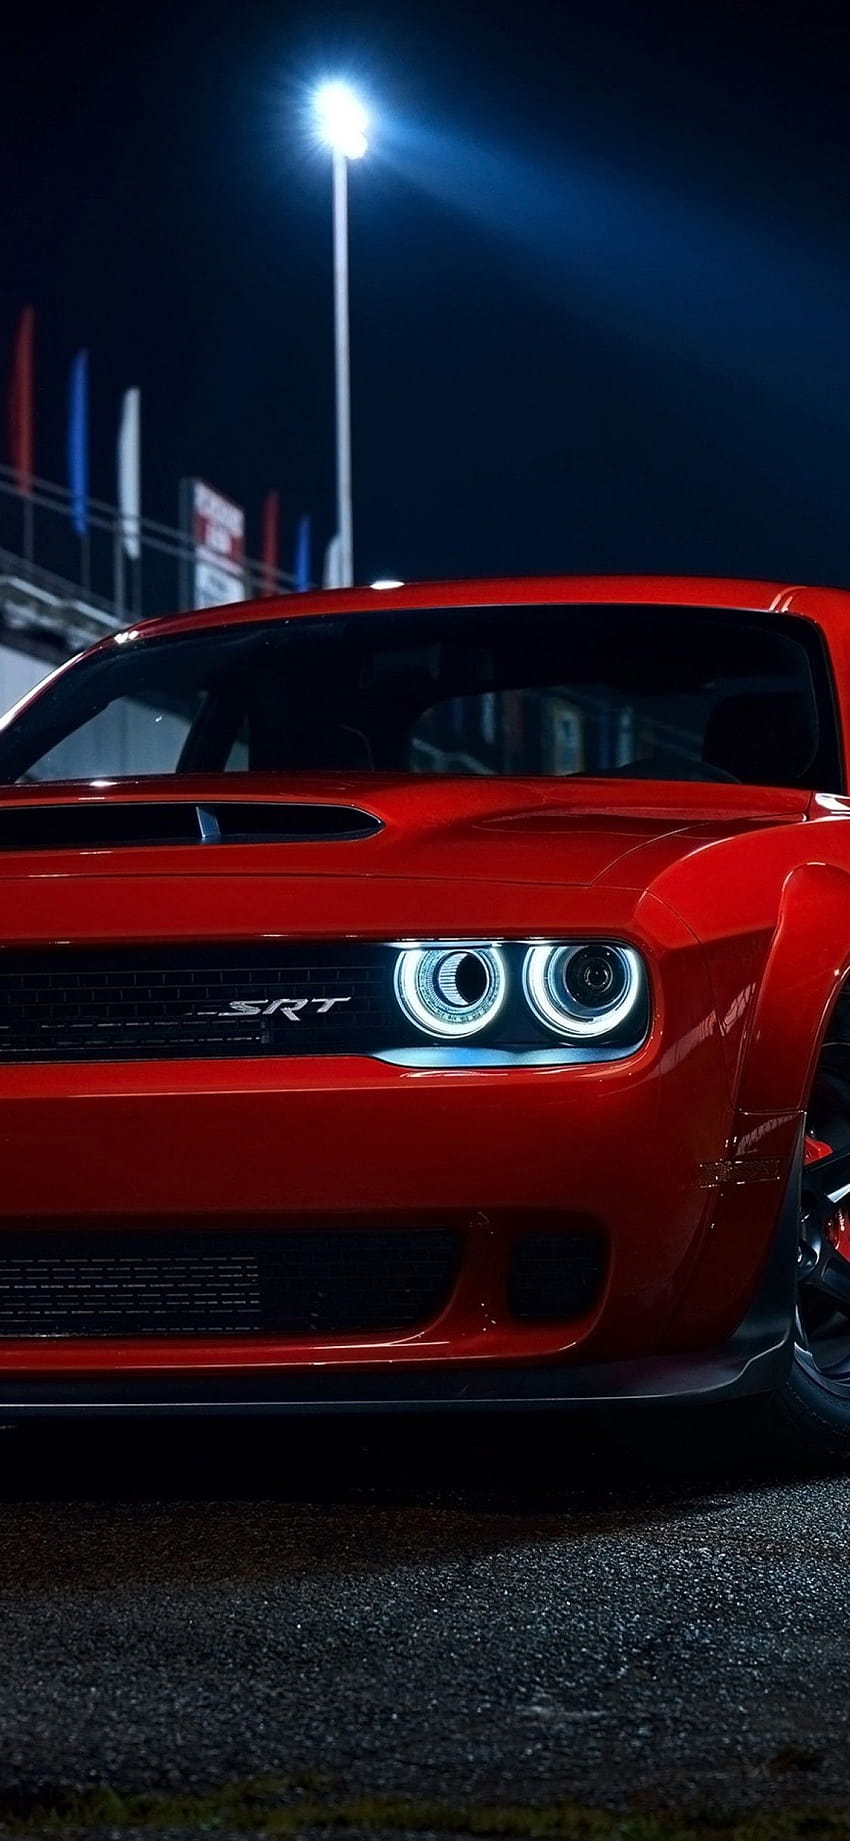 1125x2436 Dodge Challenger Sr 2018, Front View, Red, Cars, Night for ...